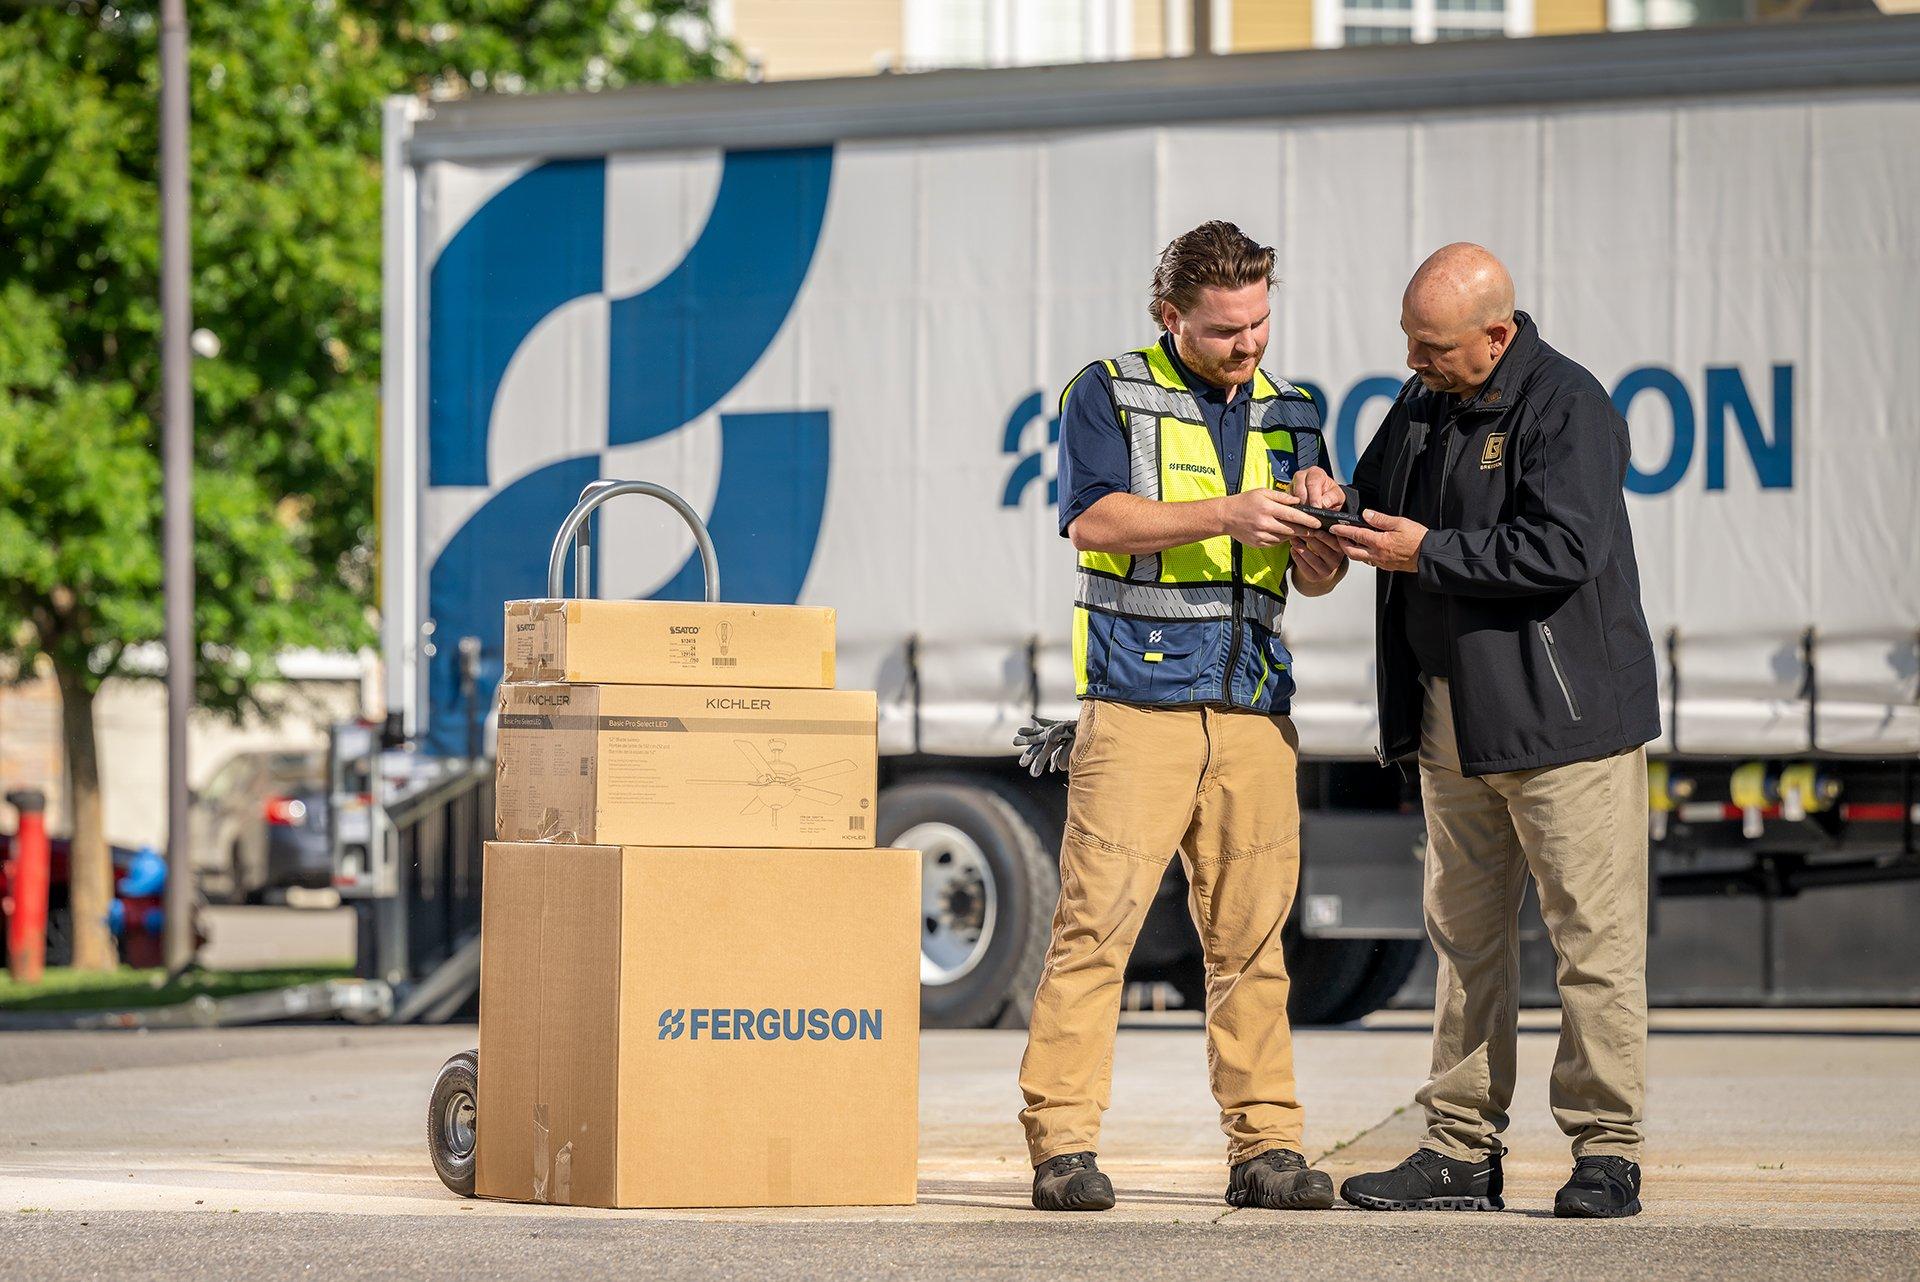 A Ferguson associate delivers supplies to a facilities manager.